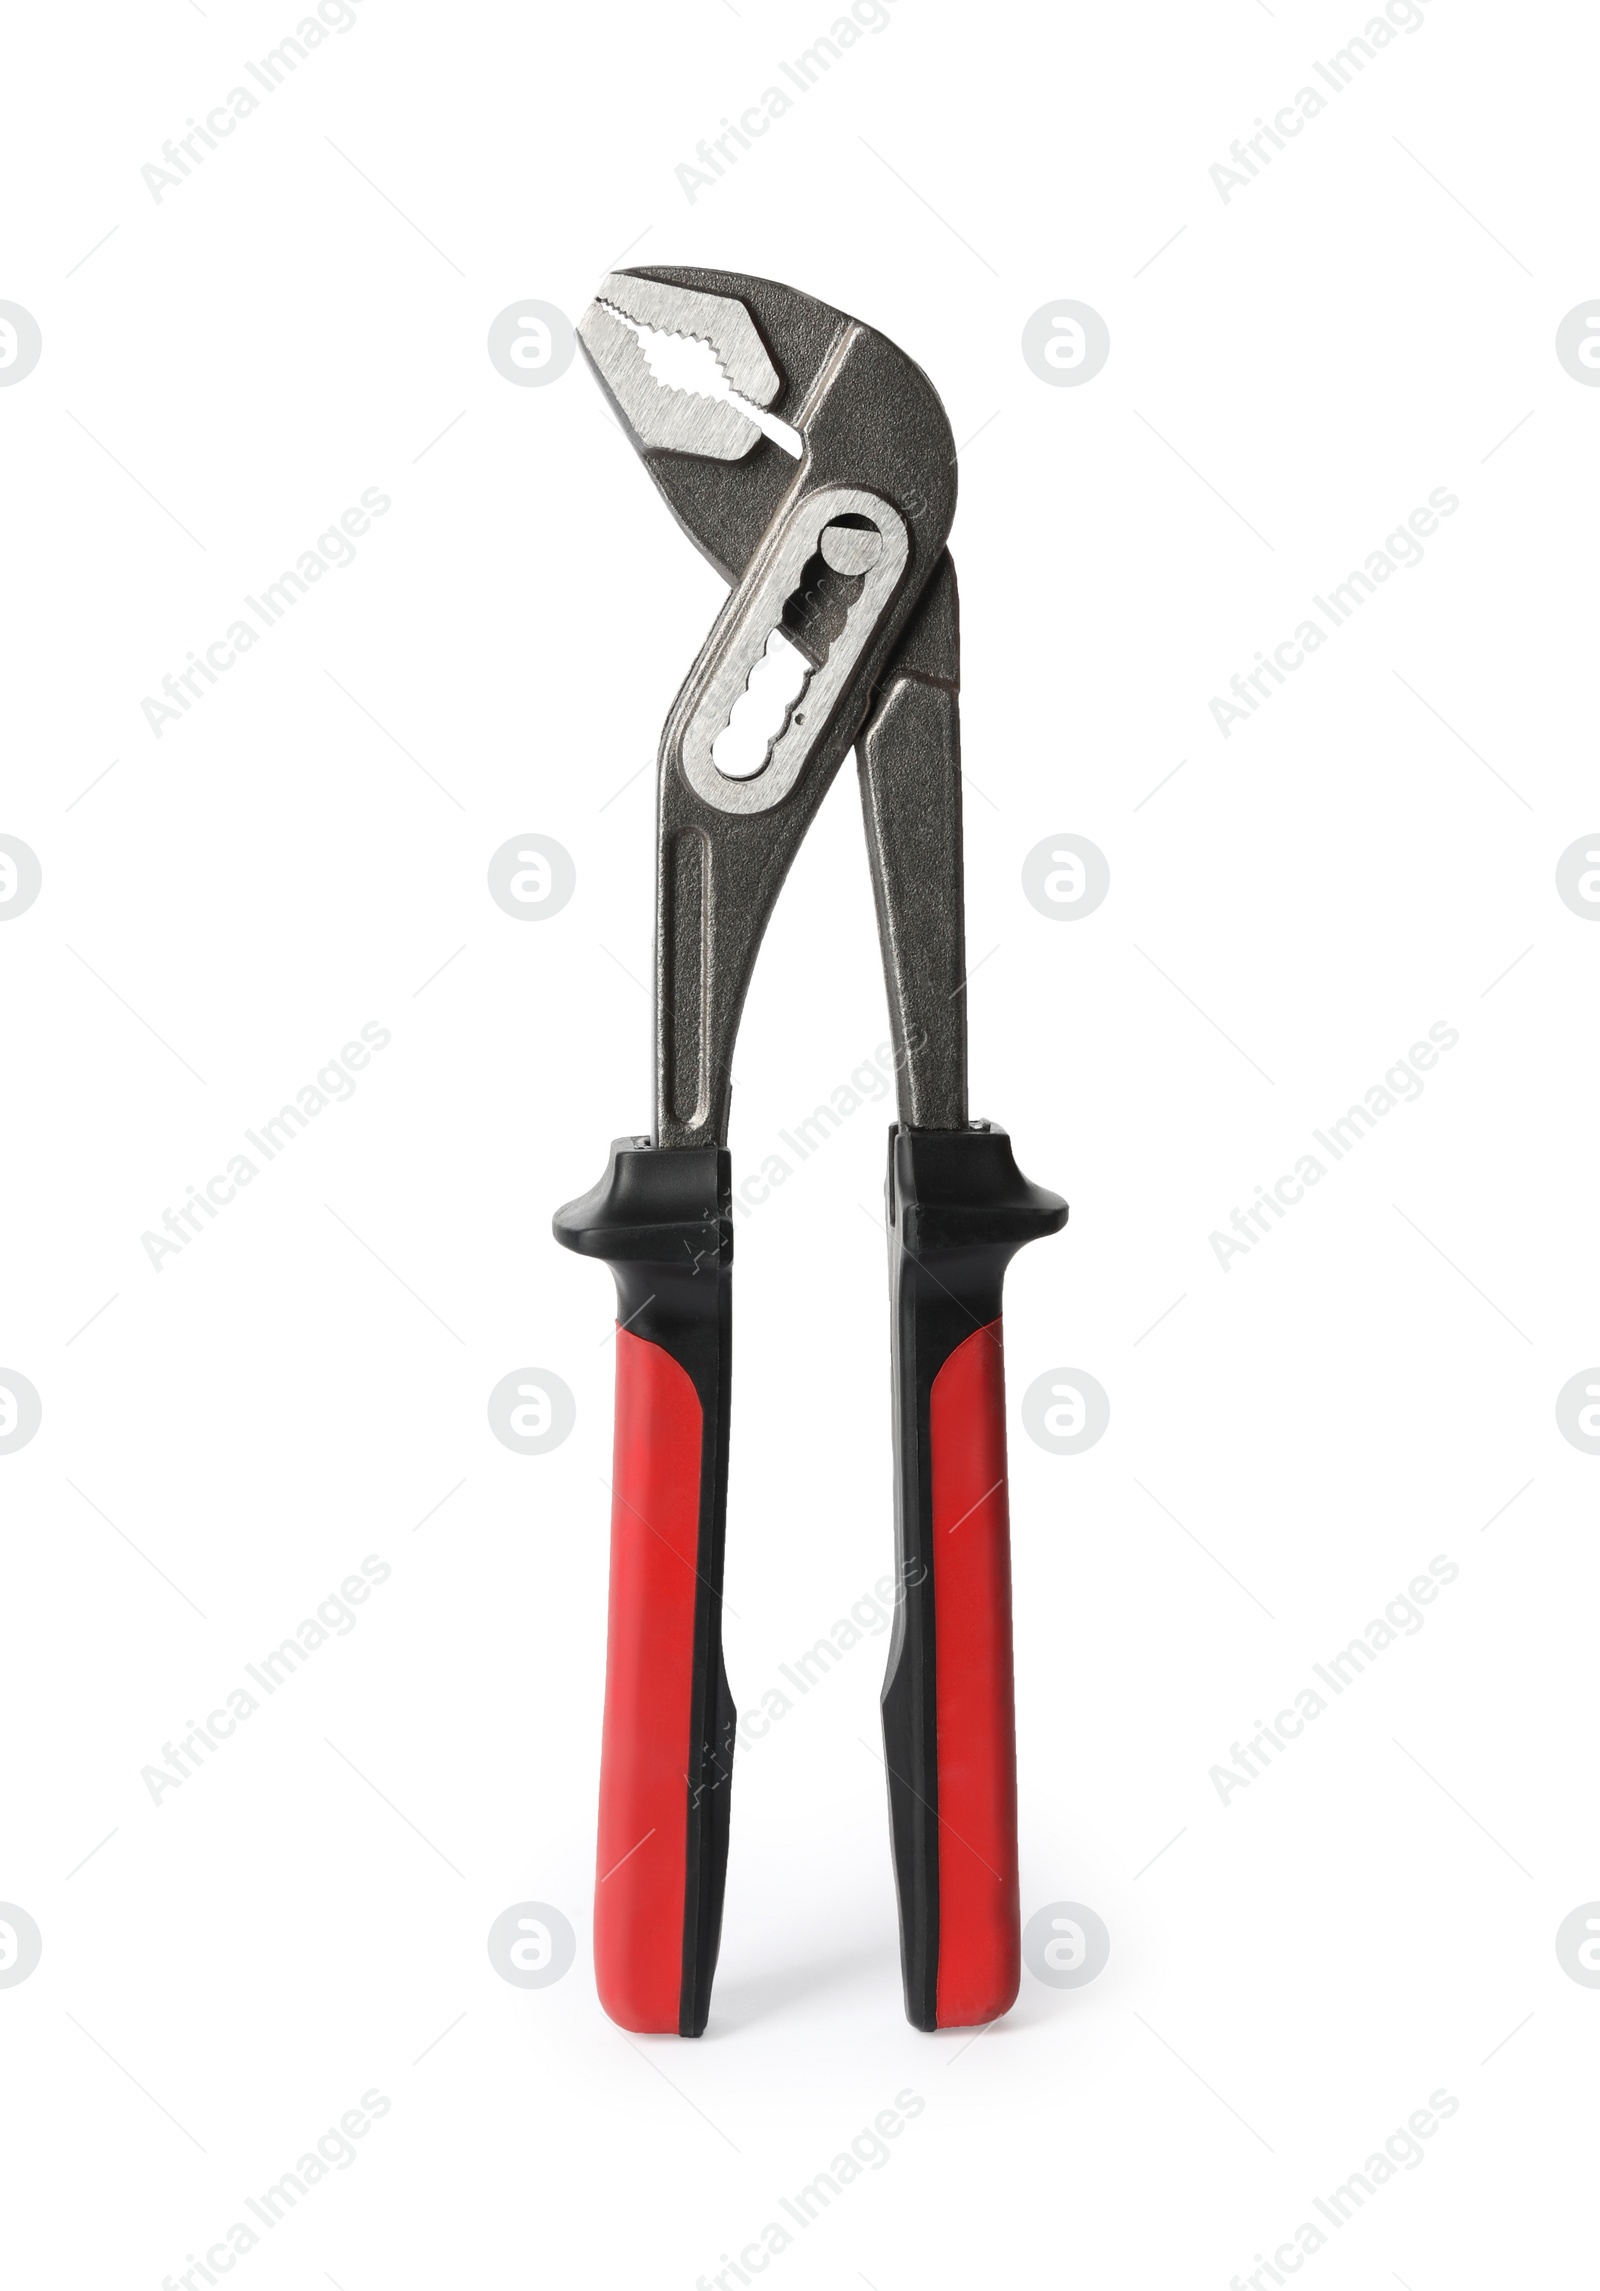 Photo of Adjustable pliers isolated on white. Construction tool